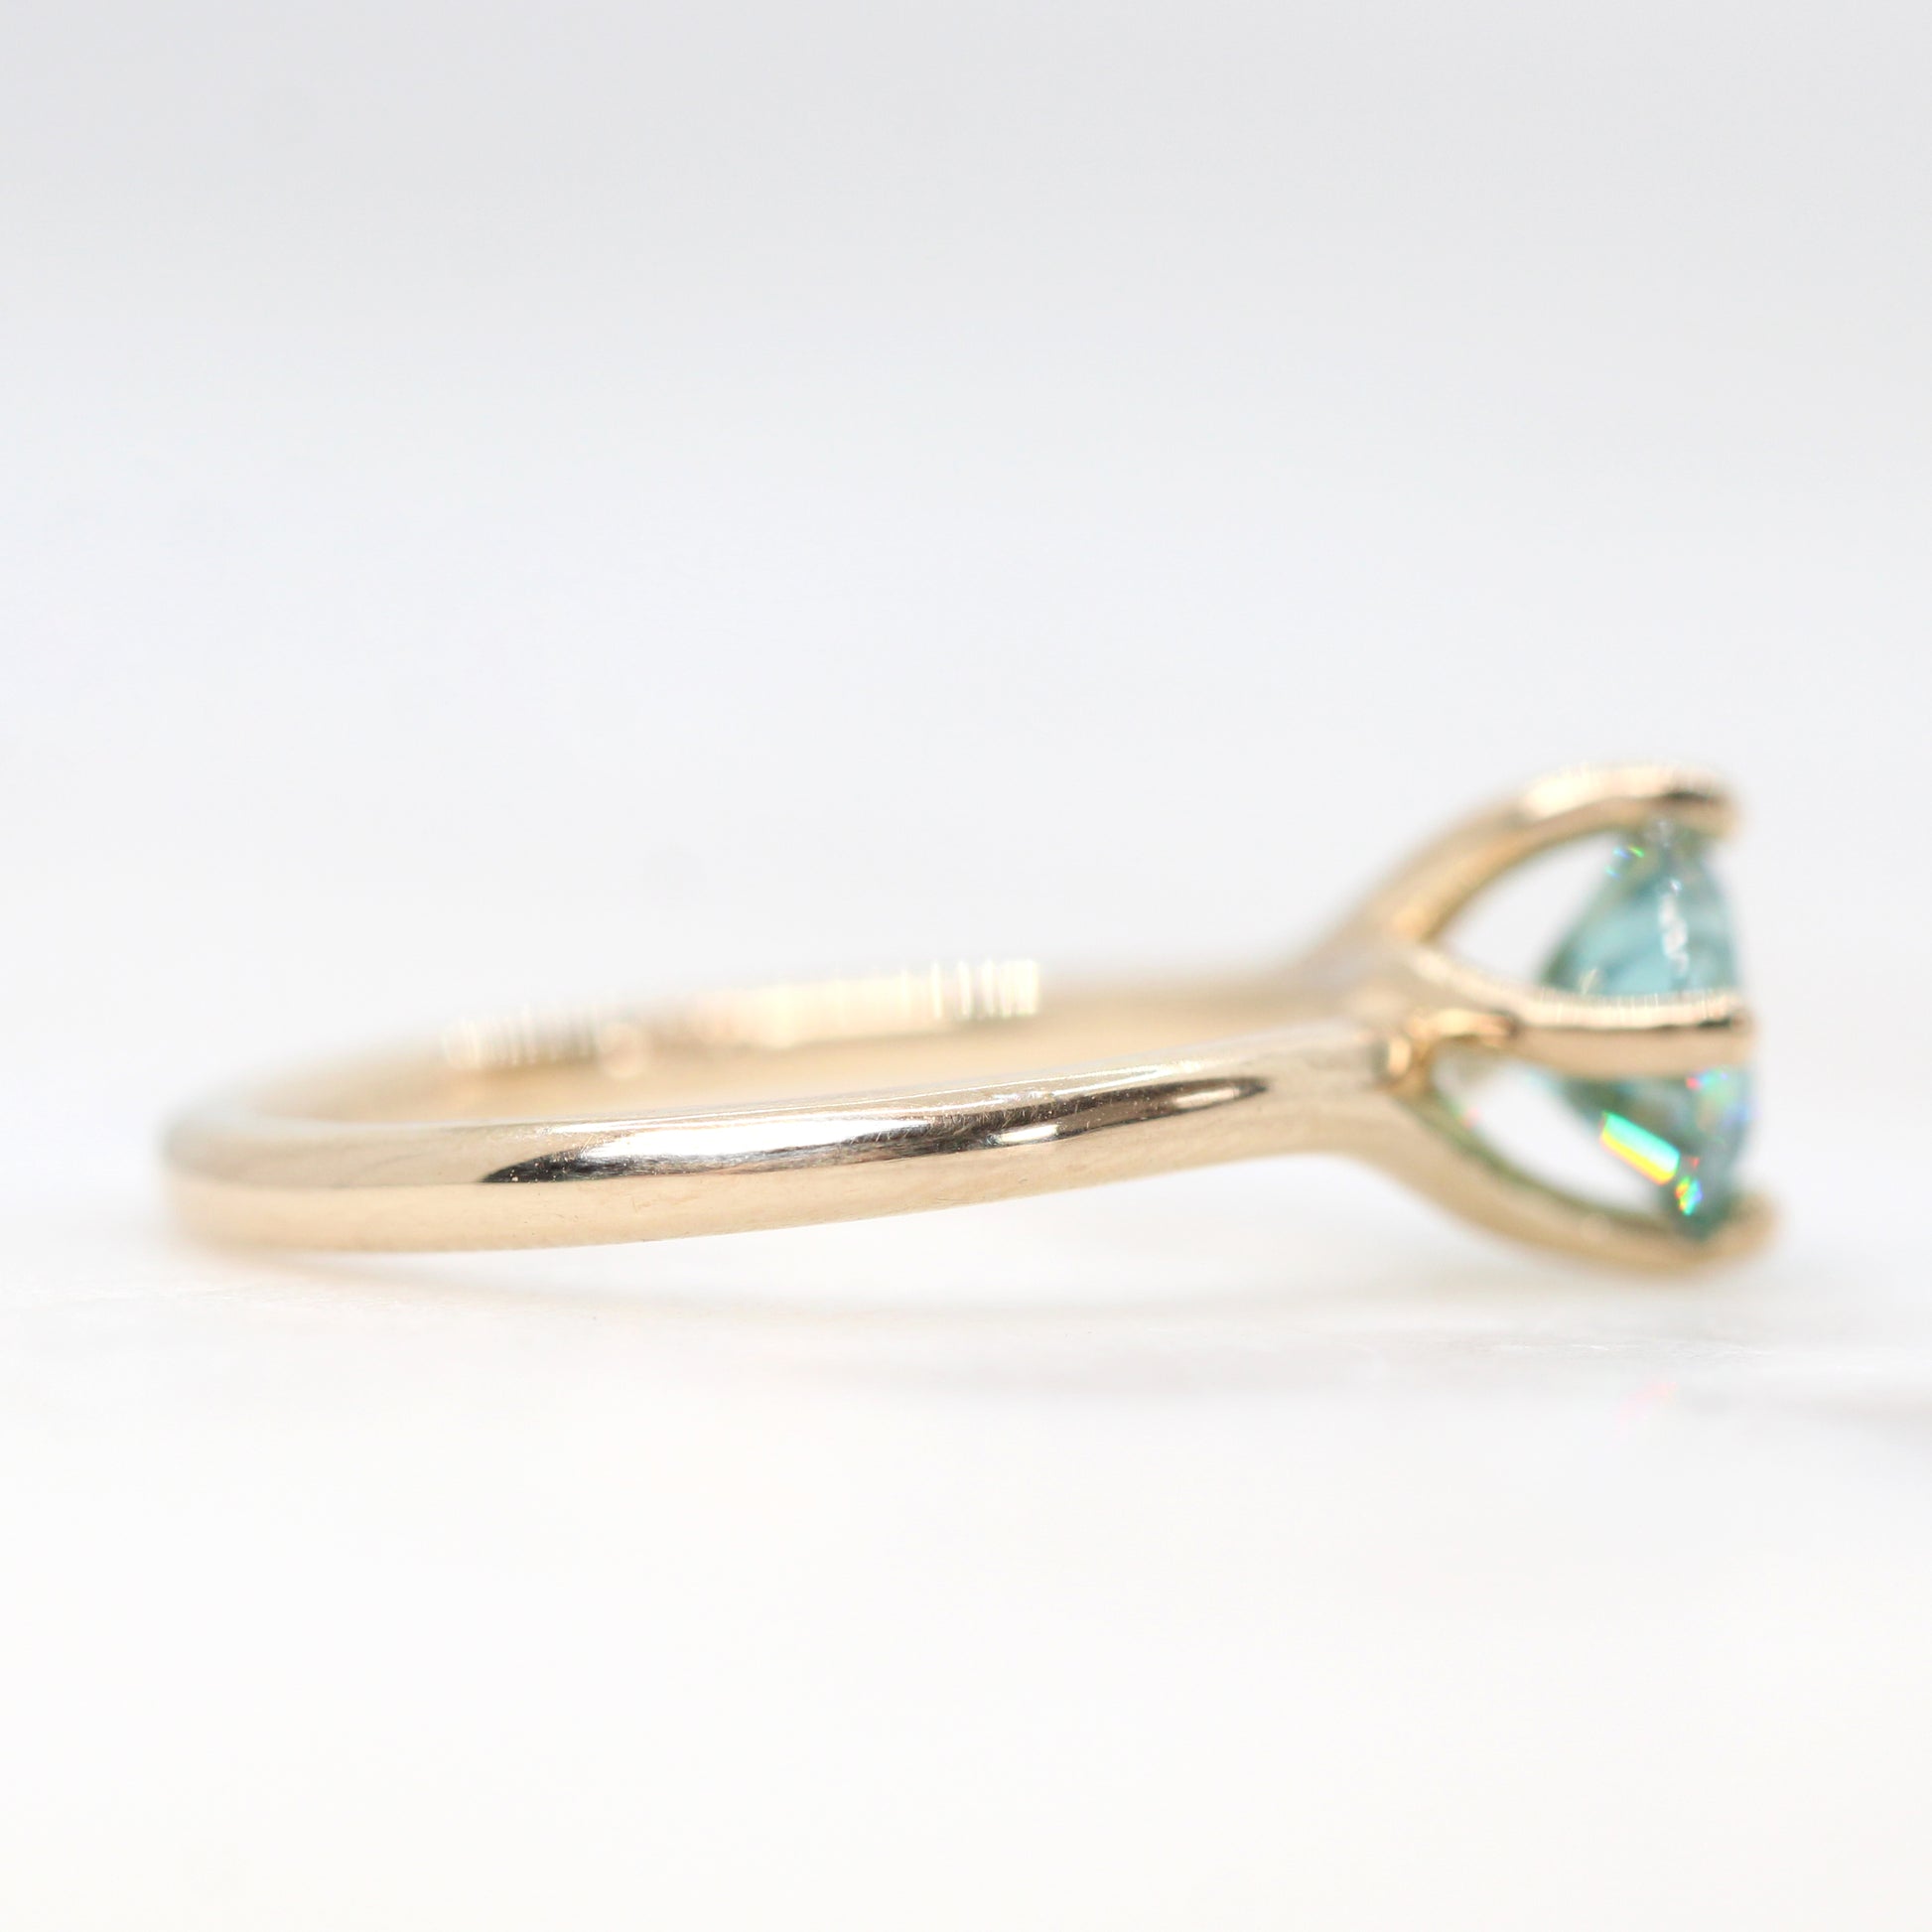 Spira Ring with a 1.00 Carat Round Teal Moissanite in 14k Champagne Gold - Ready to Size and Ship - Midwinter Co. Alternative Bridal Rings and Modern Fine Jewelry